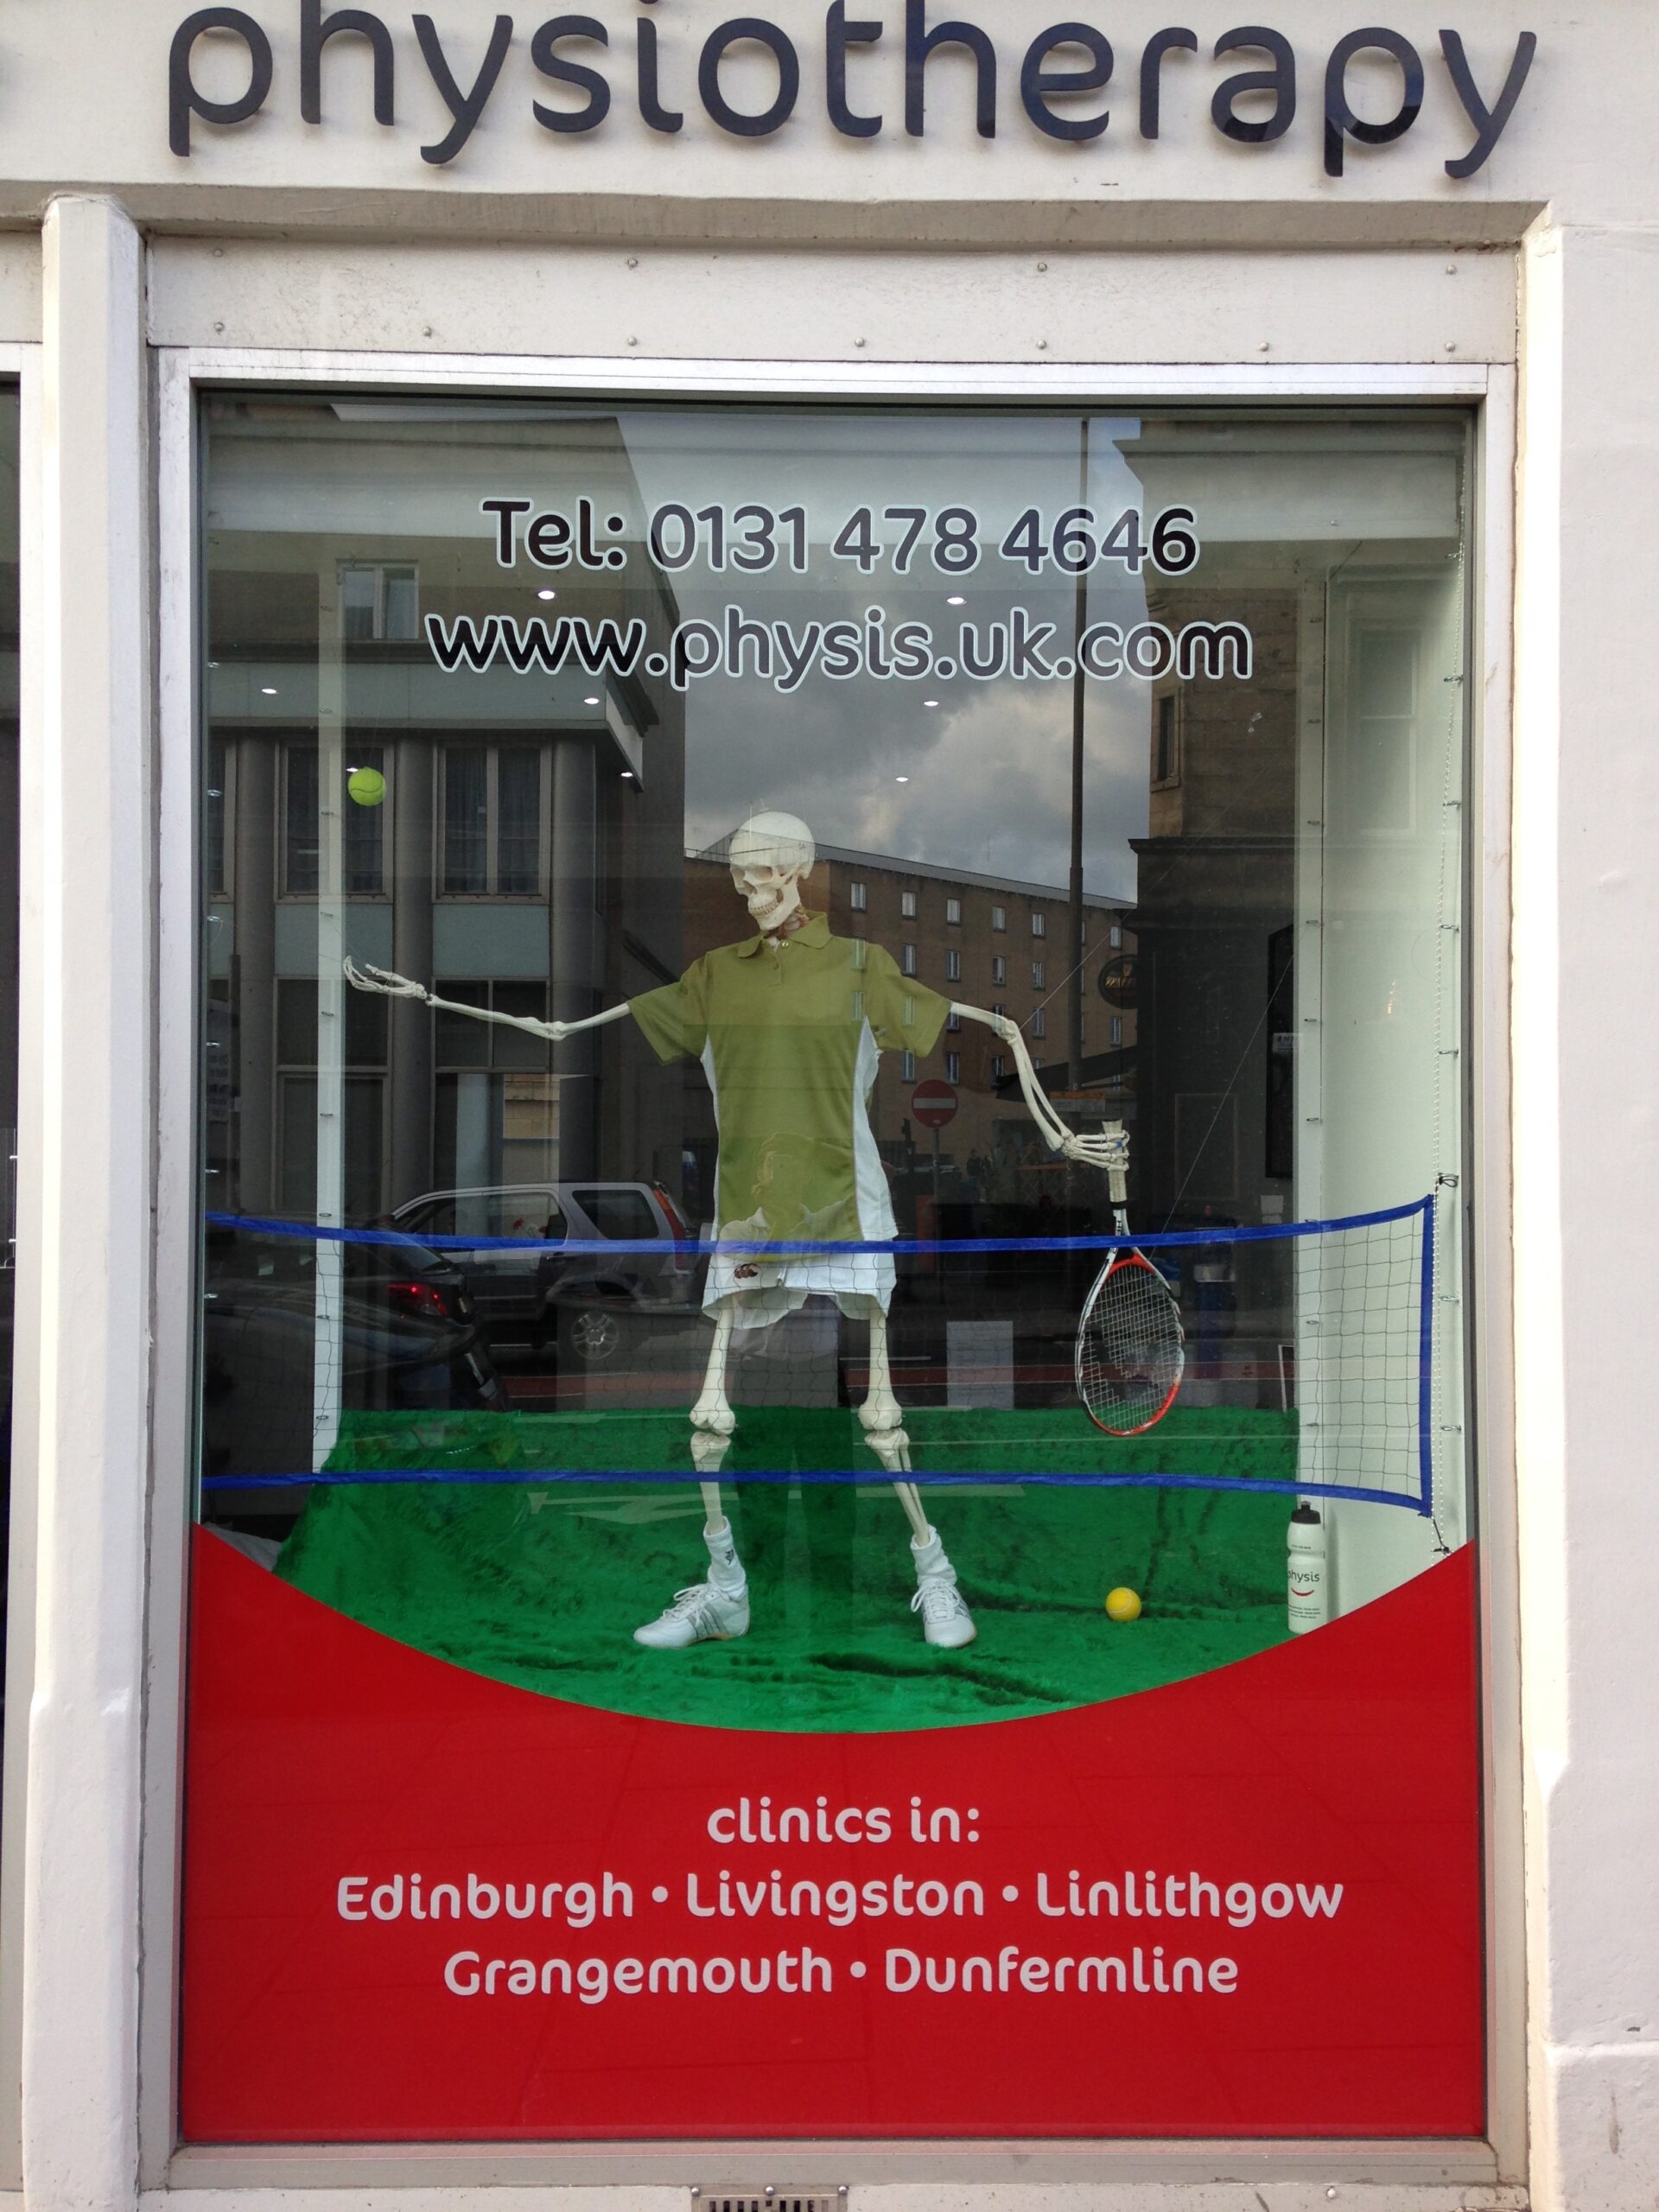 Physis Physiotherapy Window showing a skeleton playing tennis